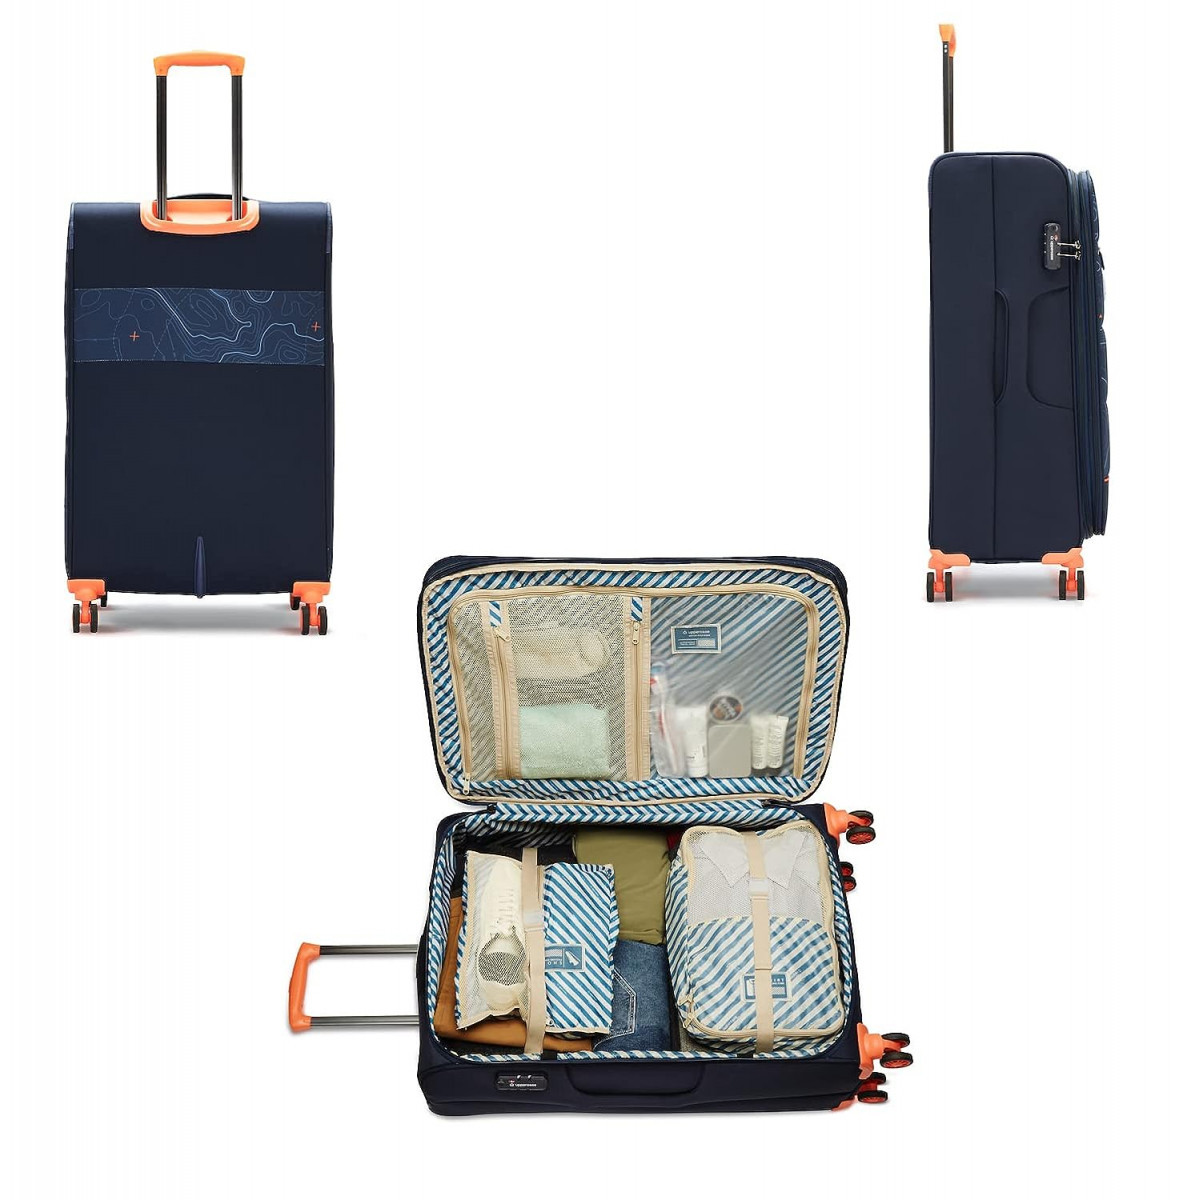 uppercase Topo Trolley Bag Set Of 2 SL Sustainable Cabin  Check-In Luggage Soft Printed Luggage Combination Lock 8 Wheel Suitcase For Men  Women 2500 Days Warranty Blue Polyester Spinner